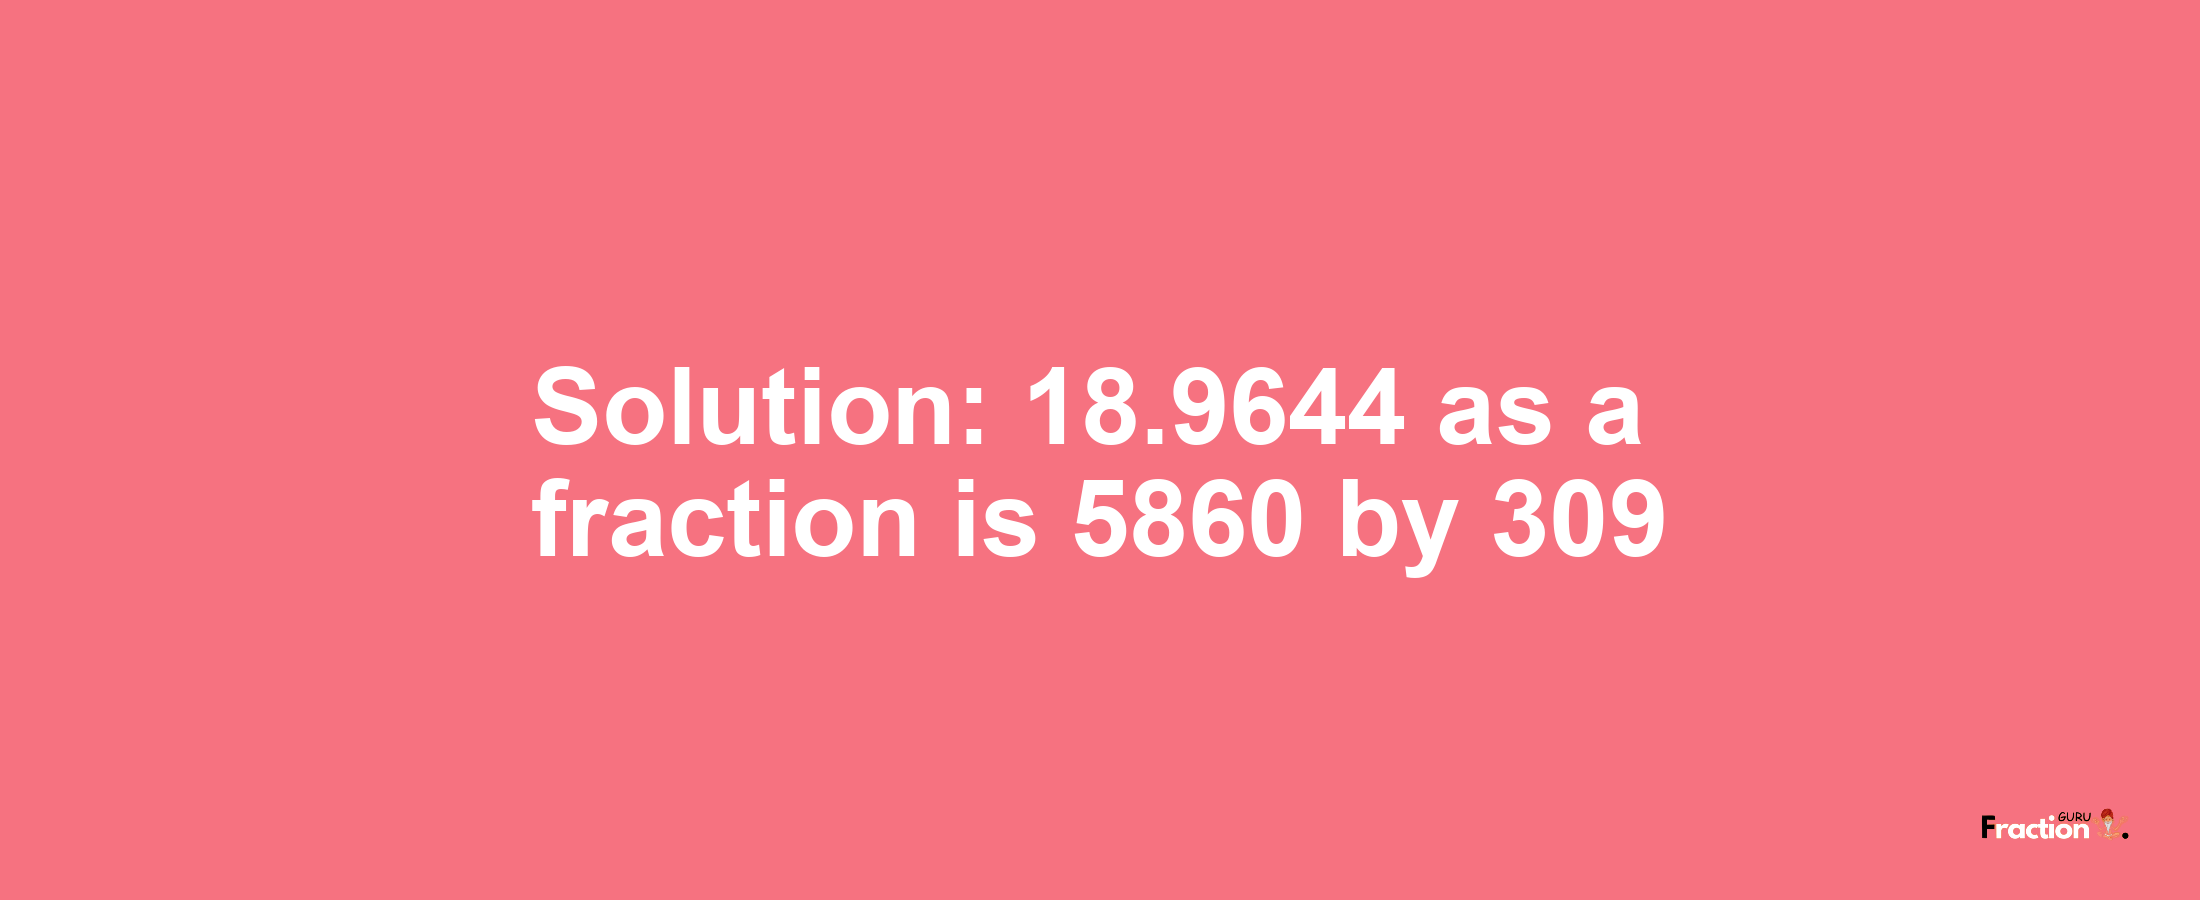 Solution:18.9644 as a fraction is 5860/309